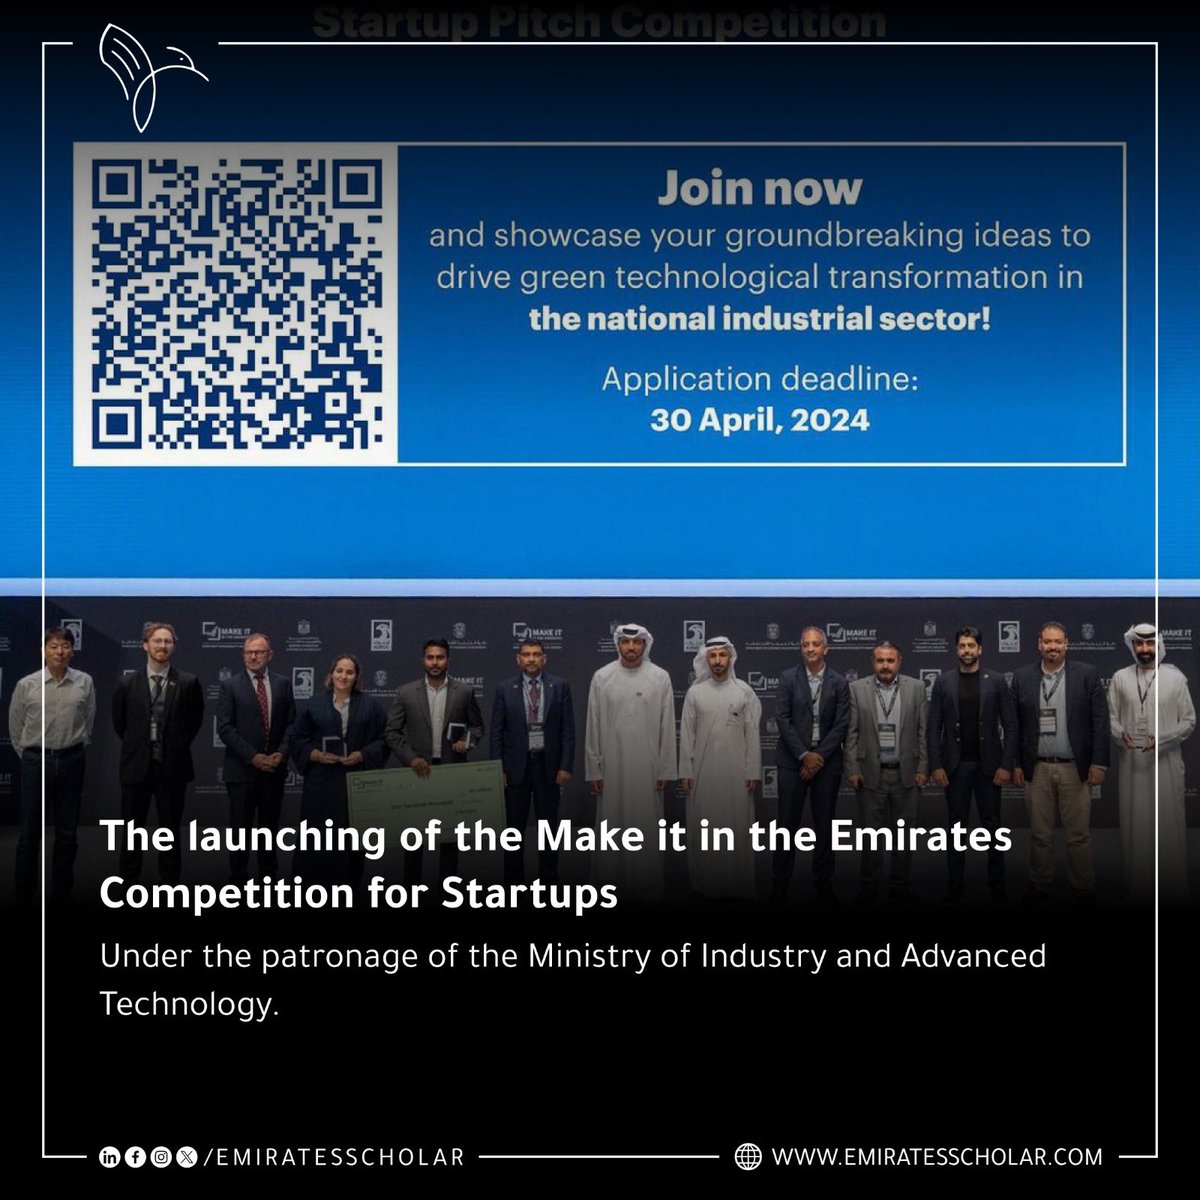 #MOIAT launches the 2nd edition of the “Make it in the Emirates” startup pitch competition, focused on additive manufacturing and de-carbonization to achieve sustainable economic development

Submissions are open until April 30, 2024, visit,

miiteawards.moiat.gov.ae/ar/auth/sign-up